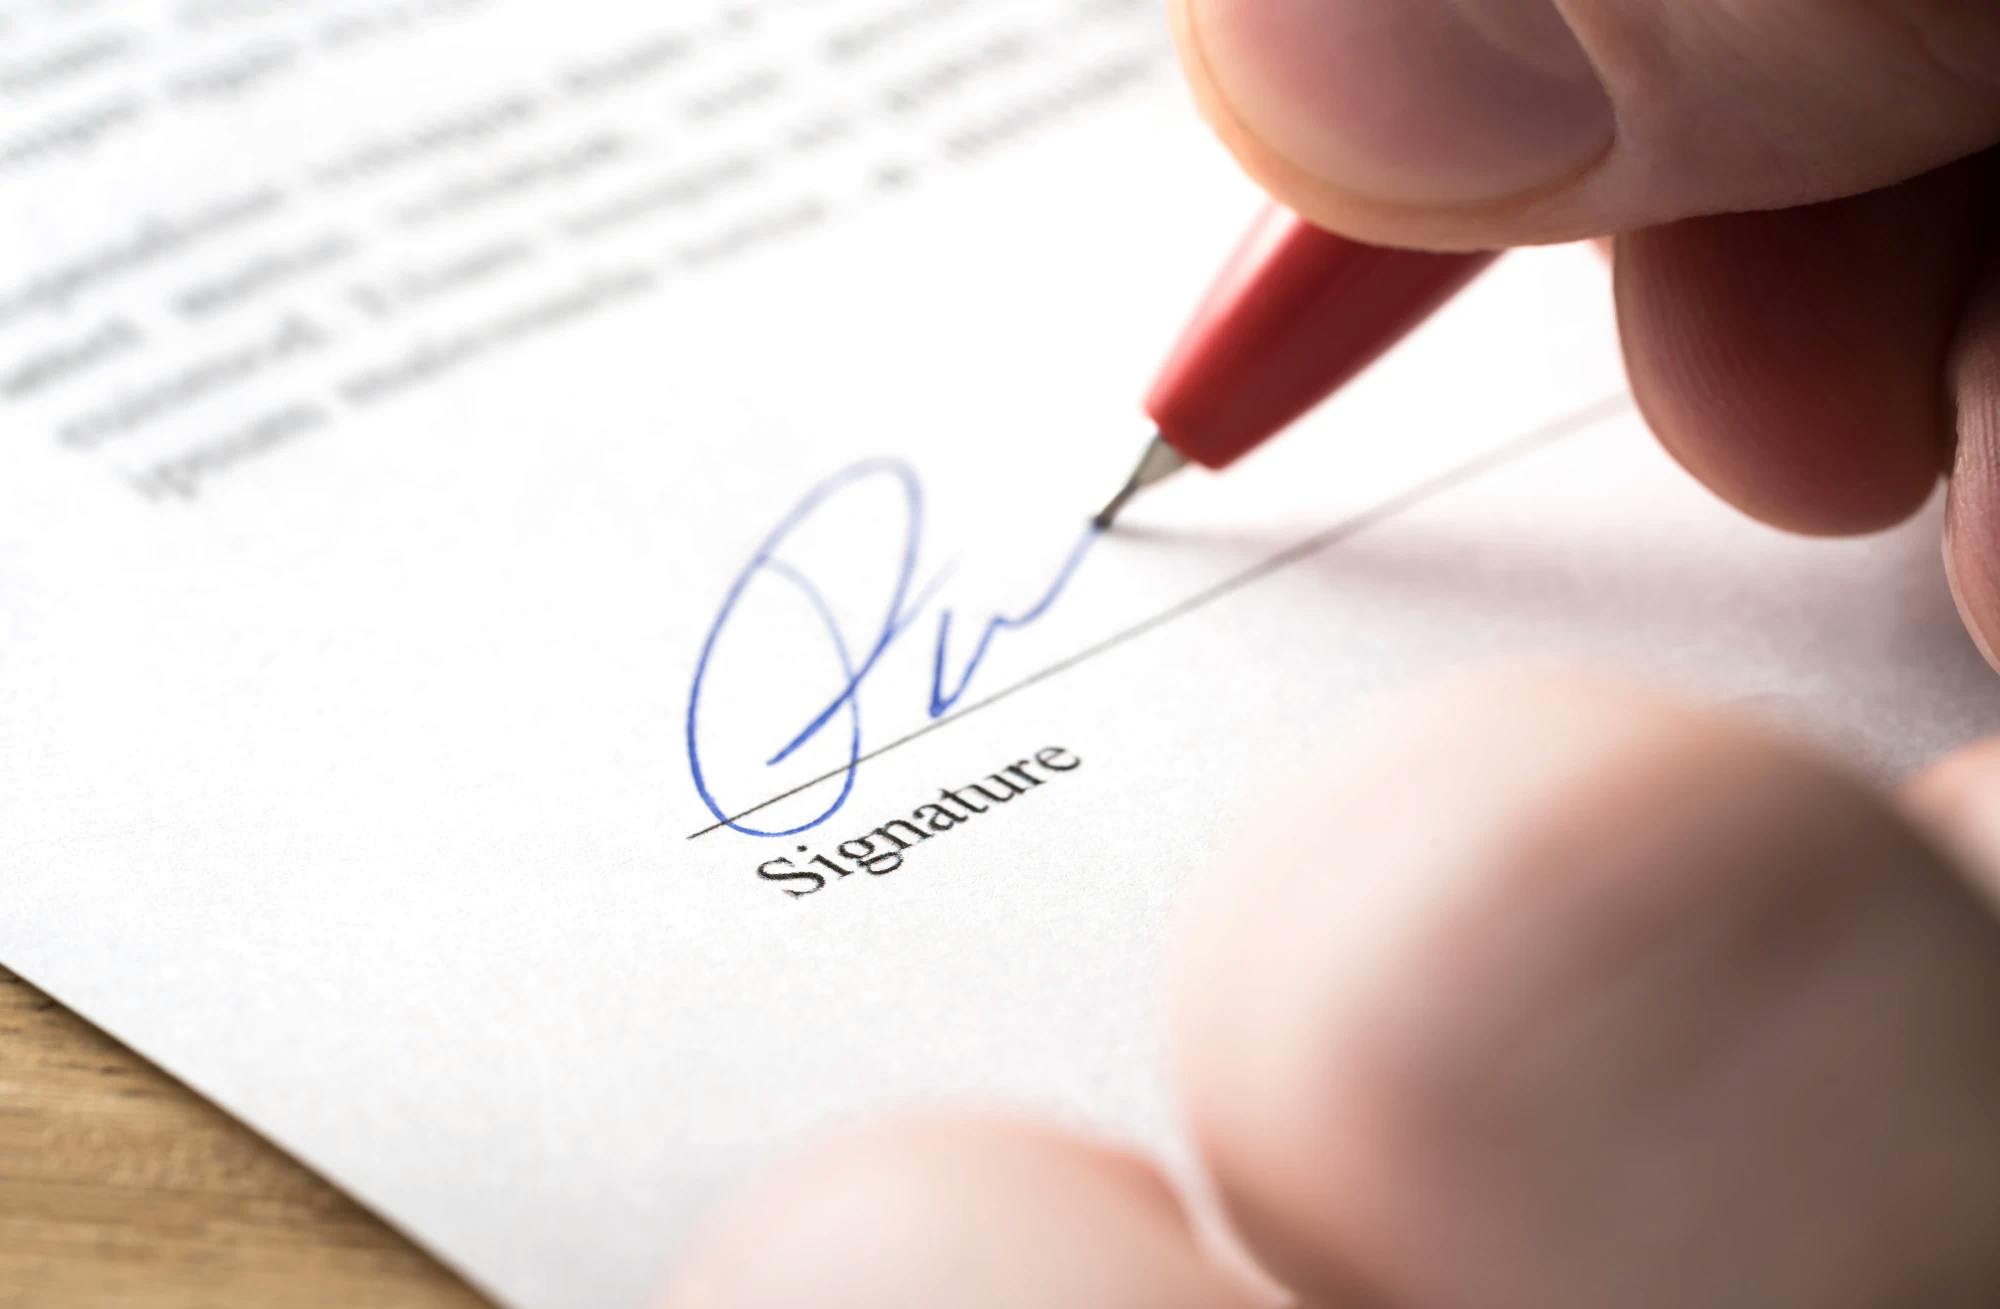 Close-up of a person signing a contract with a blue, fine-tipped pen, ostensibly a document related to the transfer of business.